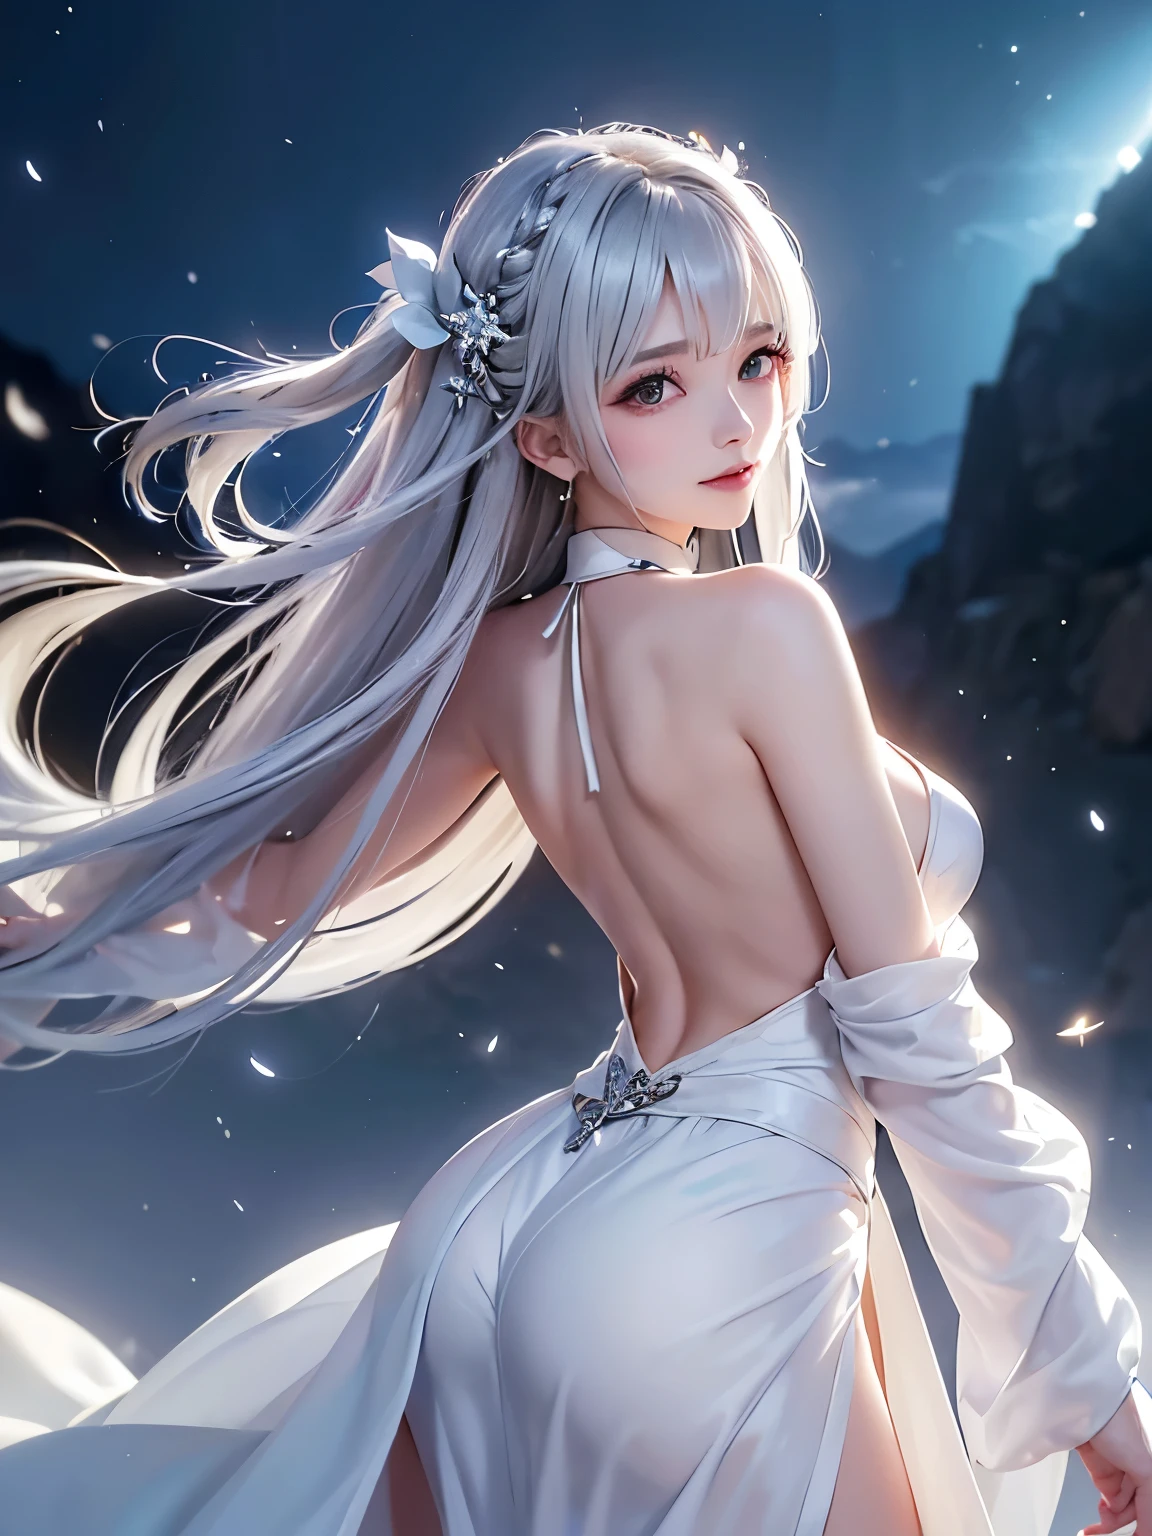 ((alone、A woman wearing a long halter dress、Elegant woman posing:1.4、Detailed face、Bright expression、Younger, brighter, whiter skin、Best Looks、The ultimate beauty、Silver hair with dazzling highlights、Shiny bright hair,、arranged hairstyle:1.2、髪がwindで踊る、A little bit of sideboob is visible))(night、wind、London at night、幻想的なwind景、Particles of light、White Dust、Dust flutters)
